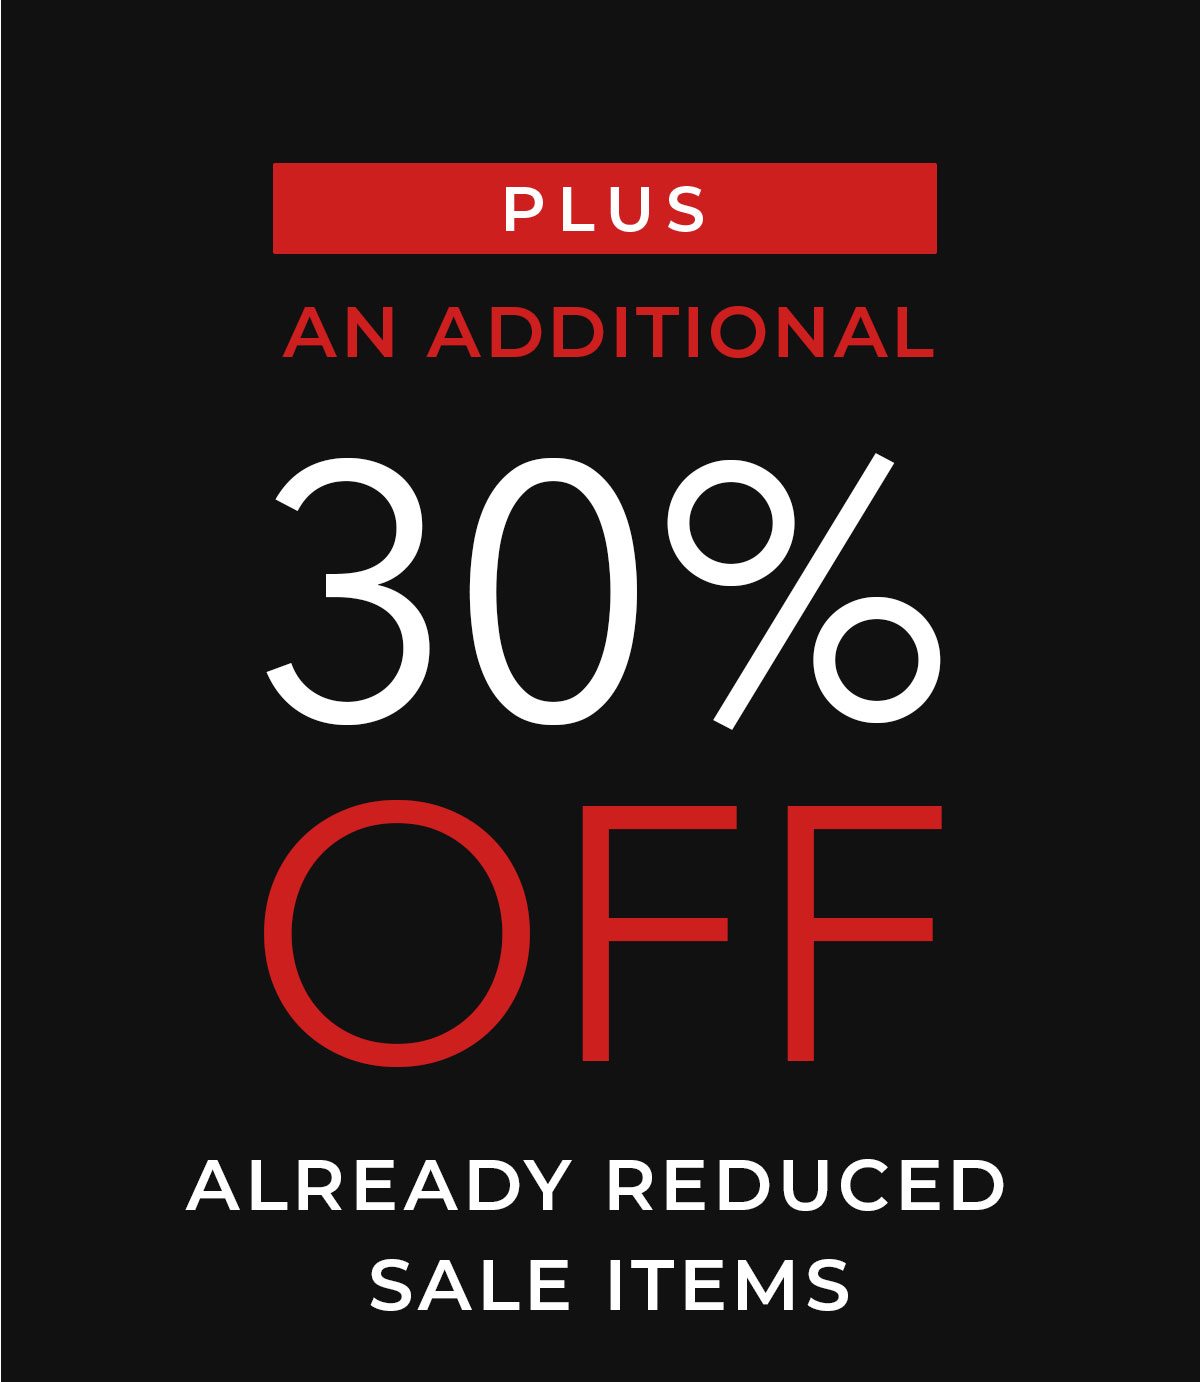 Plus an additional 30 Percent Off Already Reduced Sale Items